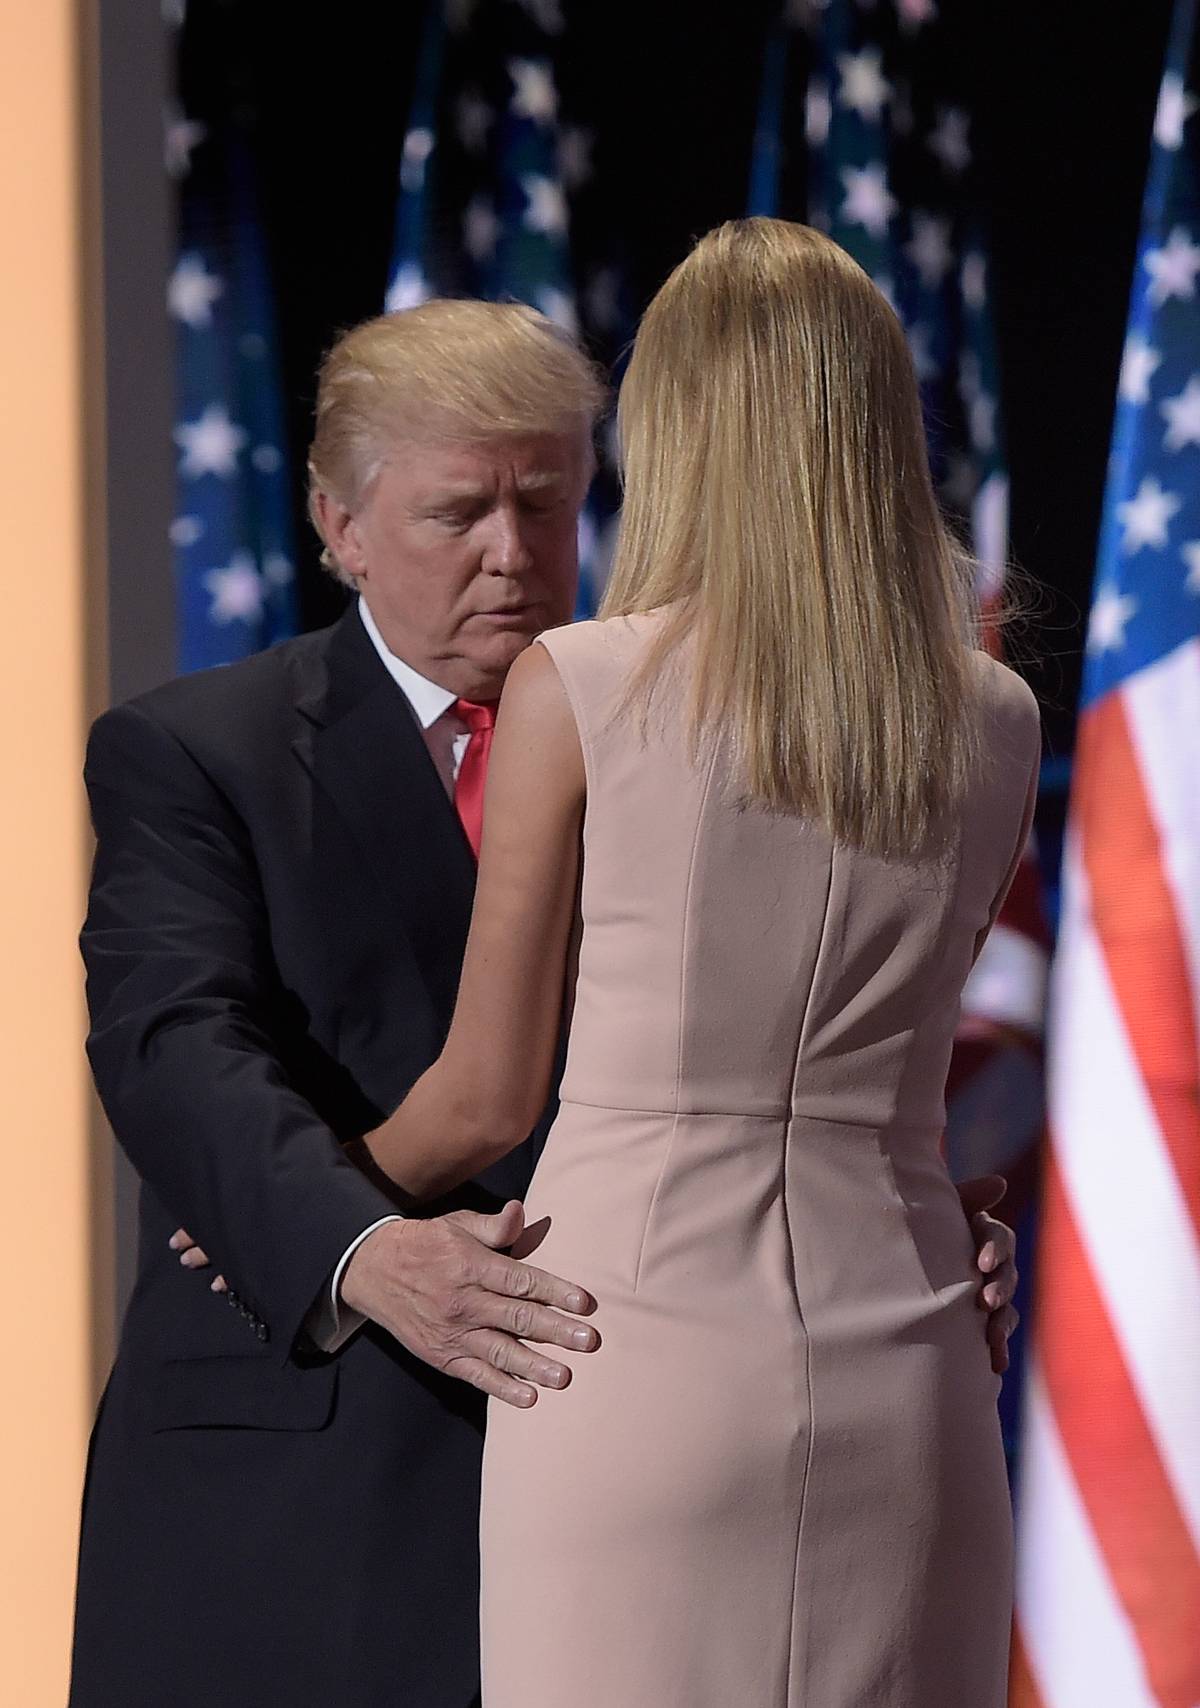 Donald Trump greets his daughter Ivanka on the last day of the Republican National Convention in Cleveland, Ohio, July 21, 2016 (Brendan Smialowsi/AFP/Getty Images))